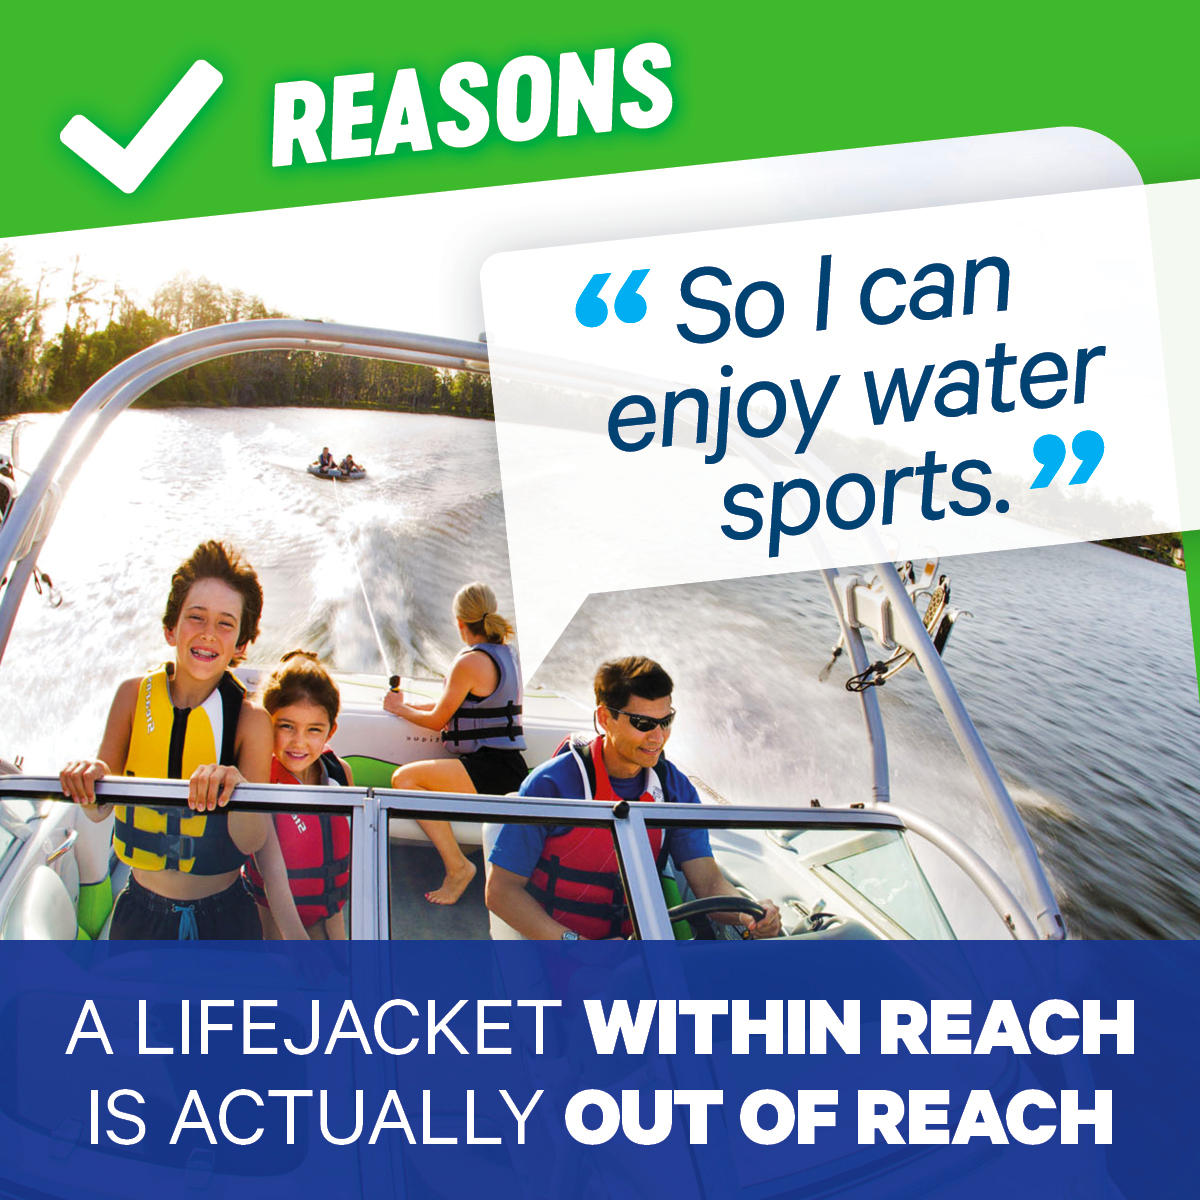 Wearing your #lifejacket for water sports is a smart decision. But only wearing it when you are participating in water sports is not a valid reason or excuse.  Accidental immersion can happen any time you head out on your boat.  
#BoatingTips #KnowBeforeYouGo #WearIt #SafeBoating